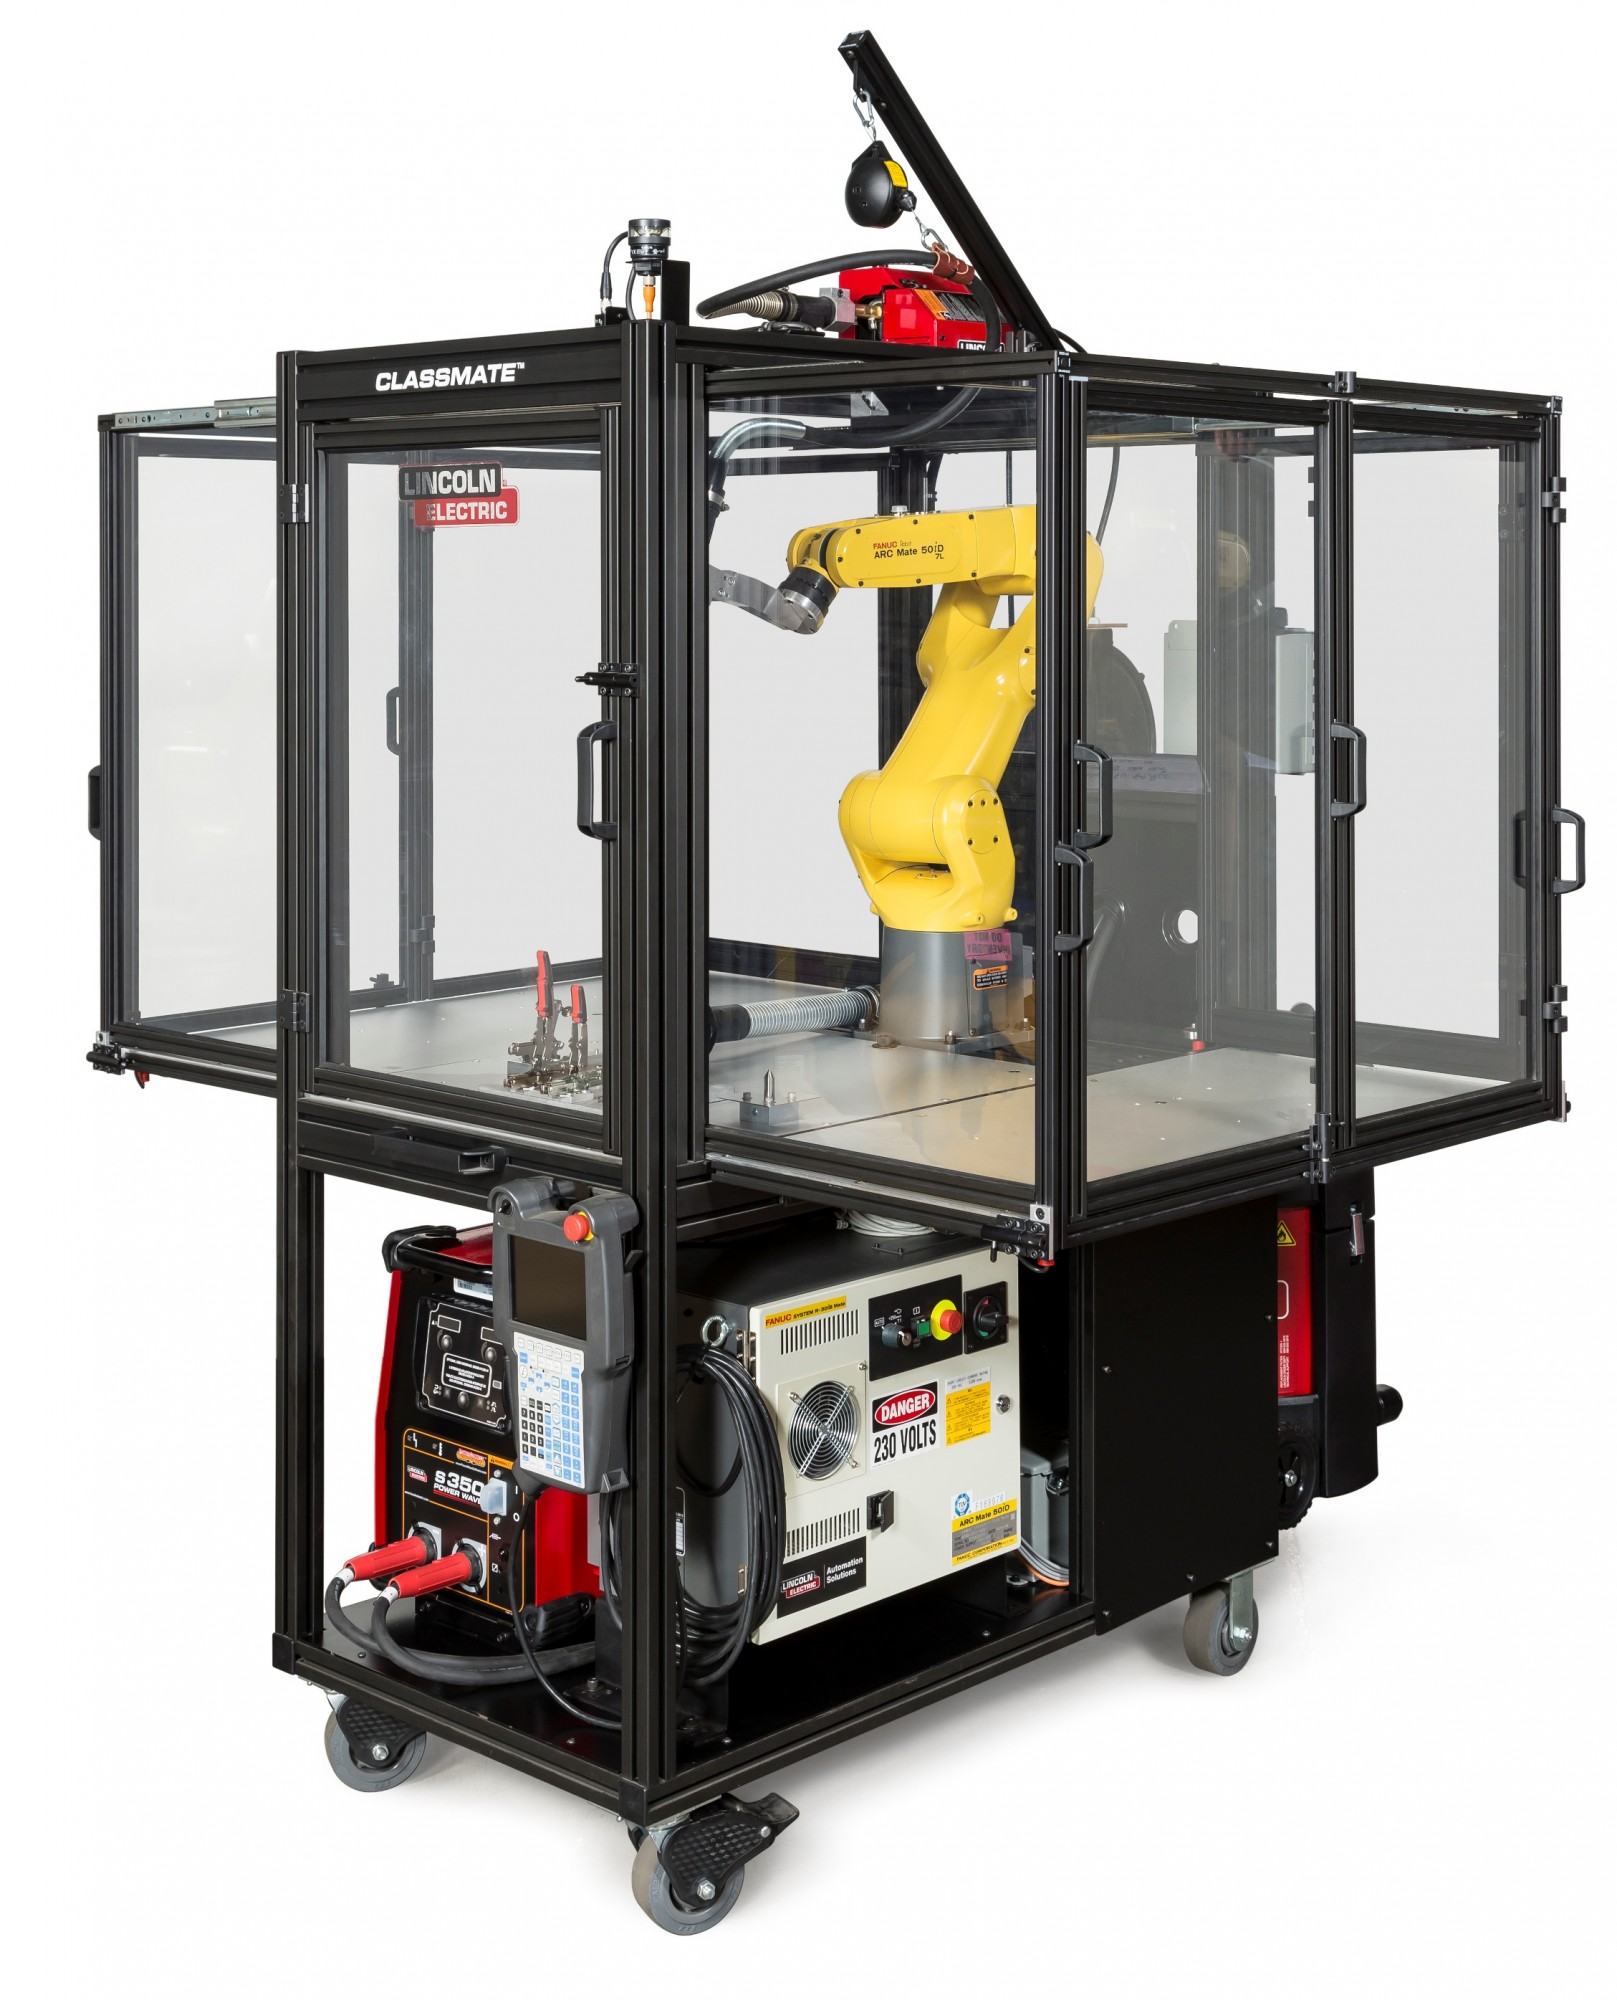 Lincoln Electric ClassMate Robotic Welding Trainer